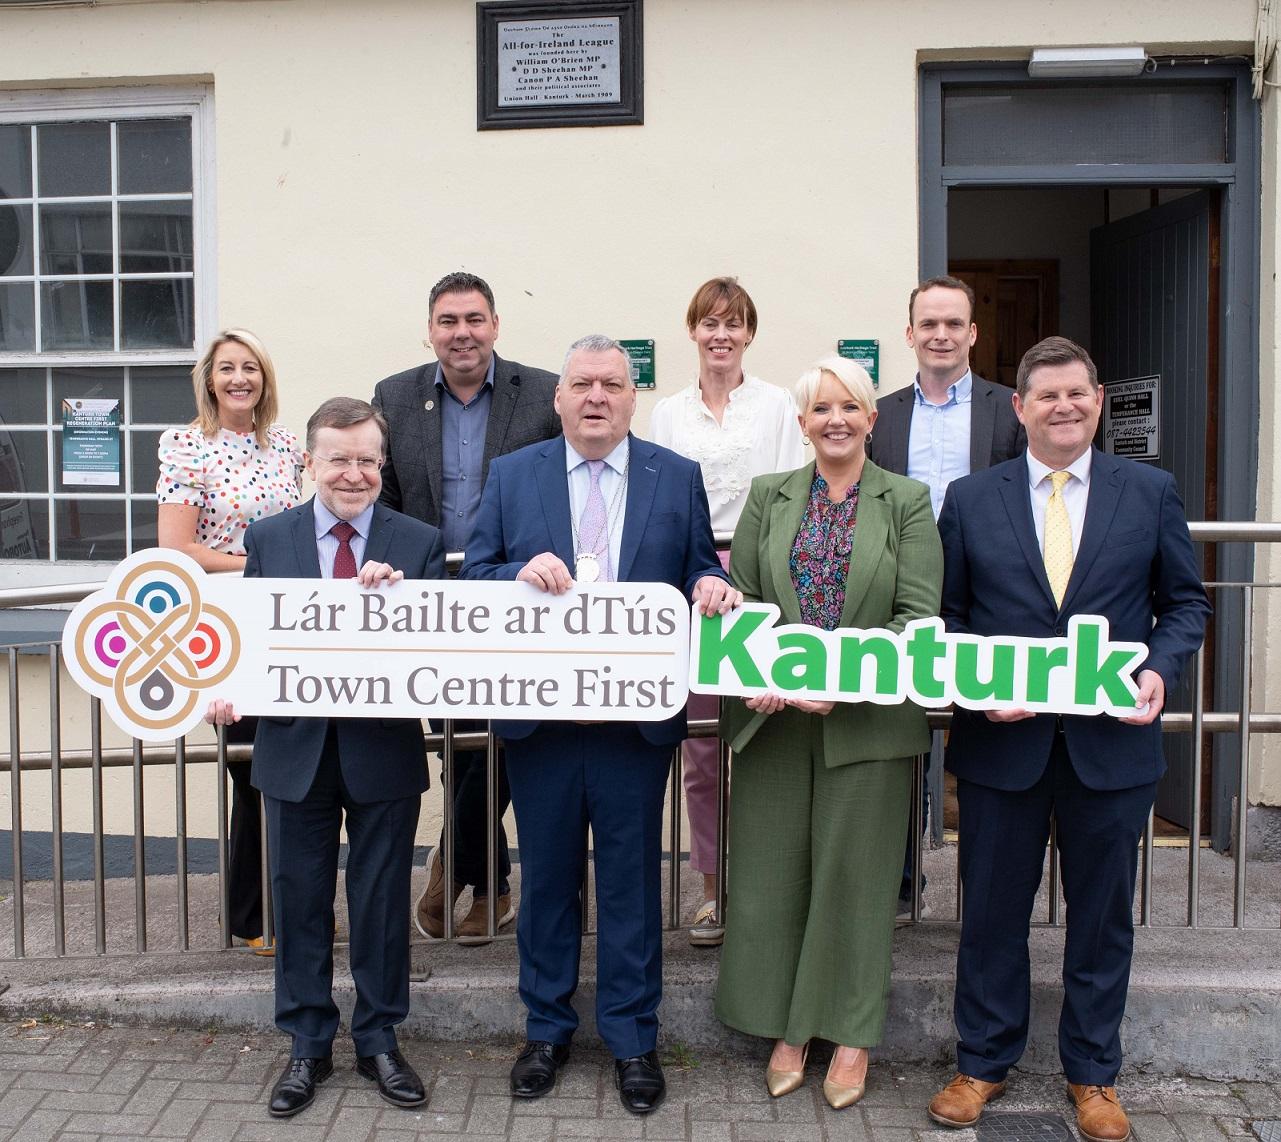 Elected members and staff of Cork County Council holding 2 signs, one saying "Town Centre First" and the other saying "Kanturk2.